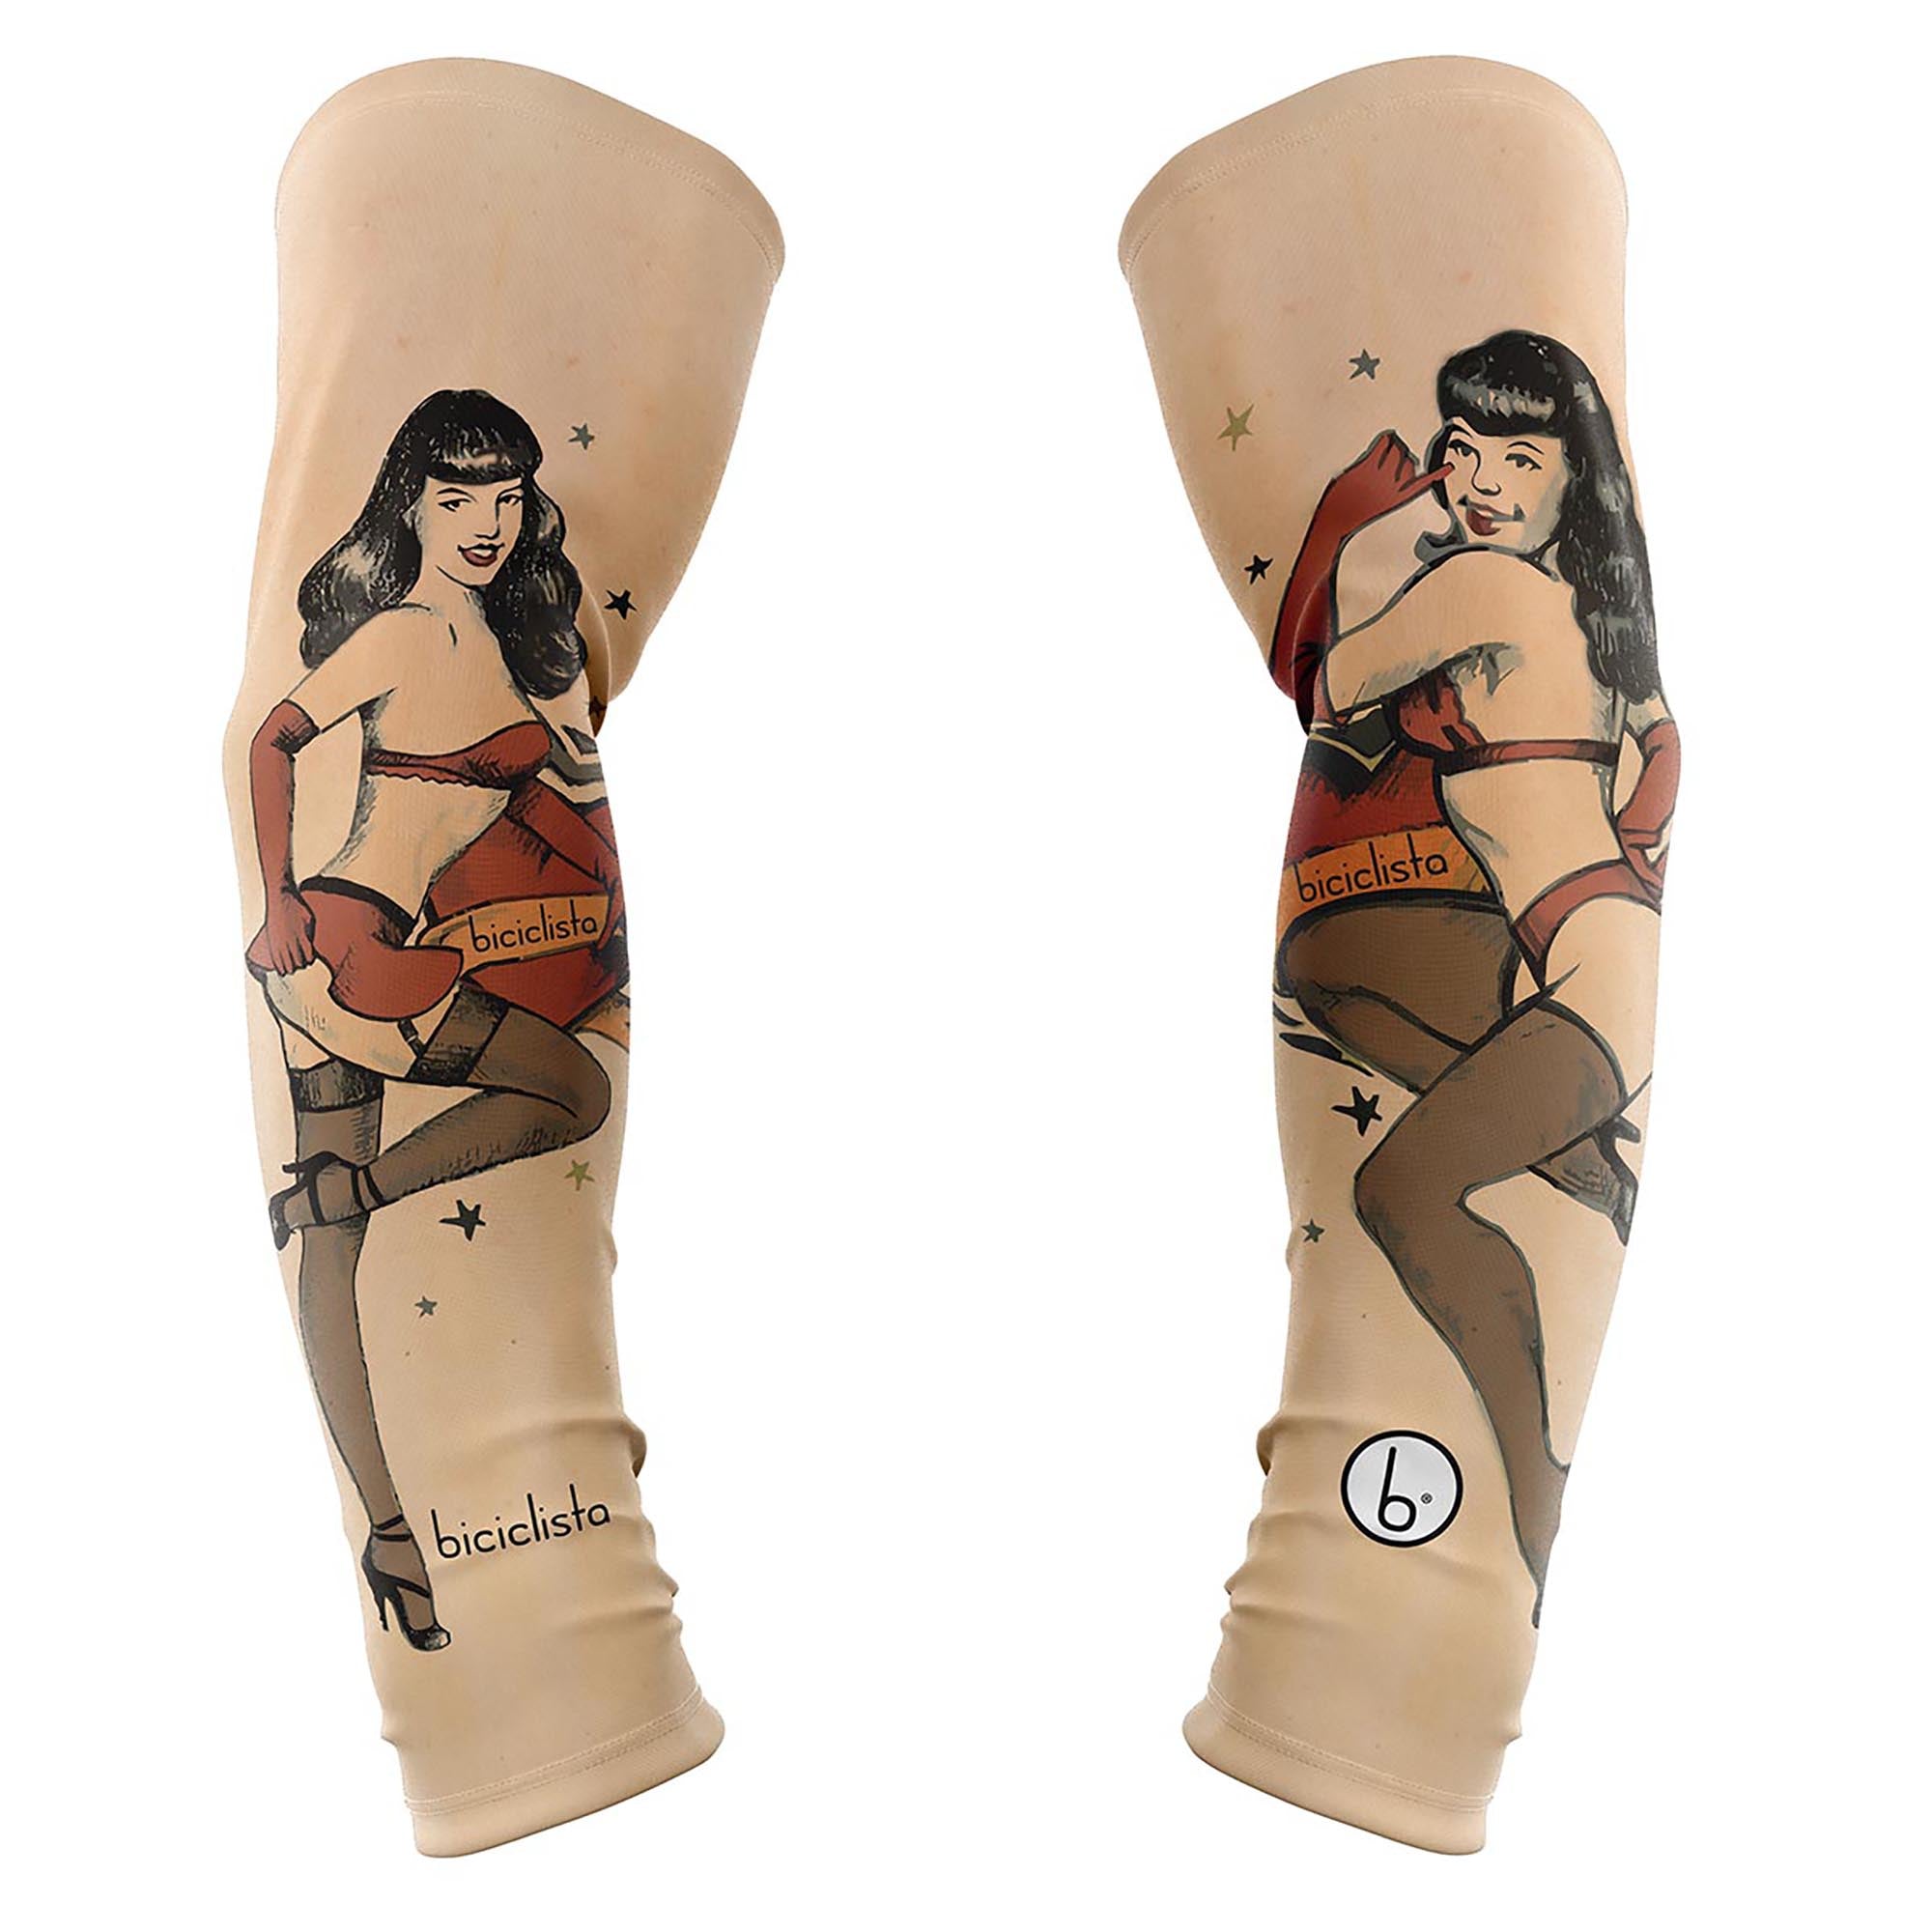 PIN-UP arm warmers